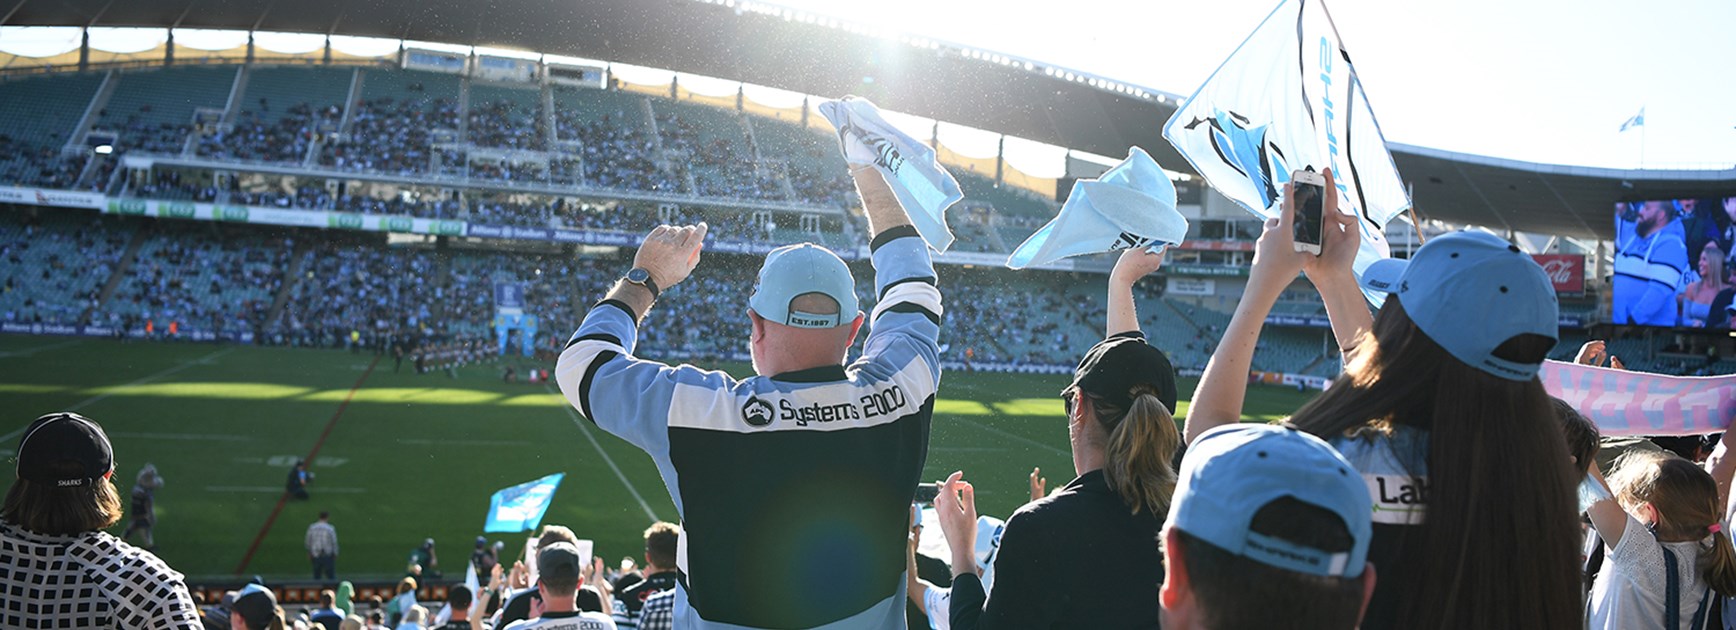 Sharks take a bite out of Membership record